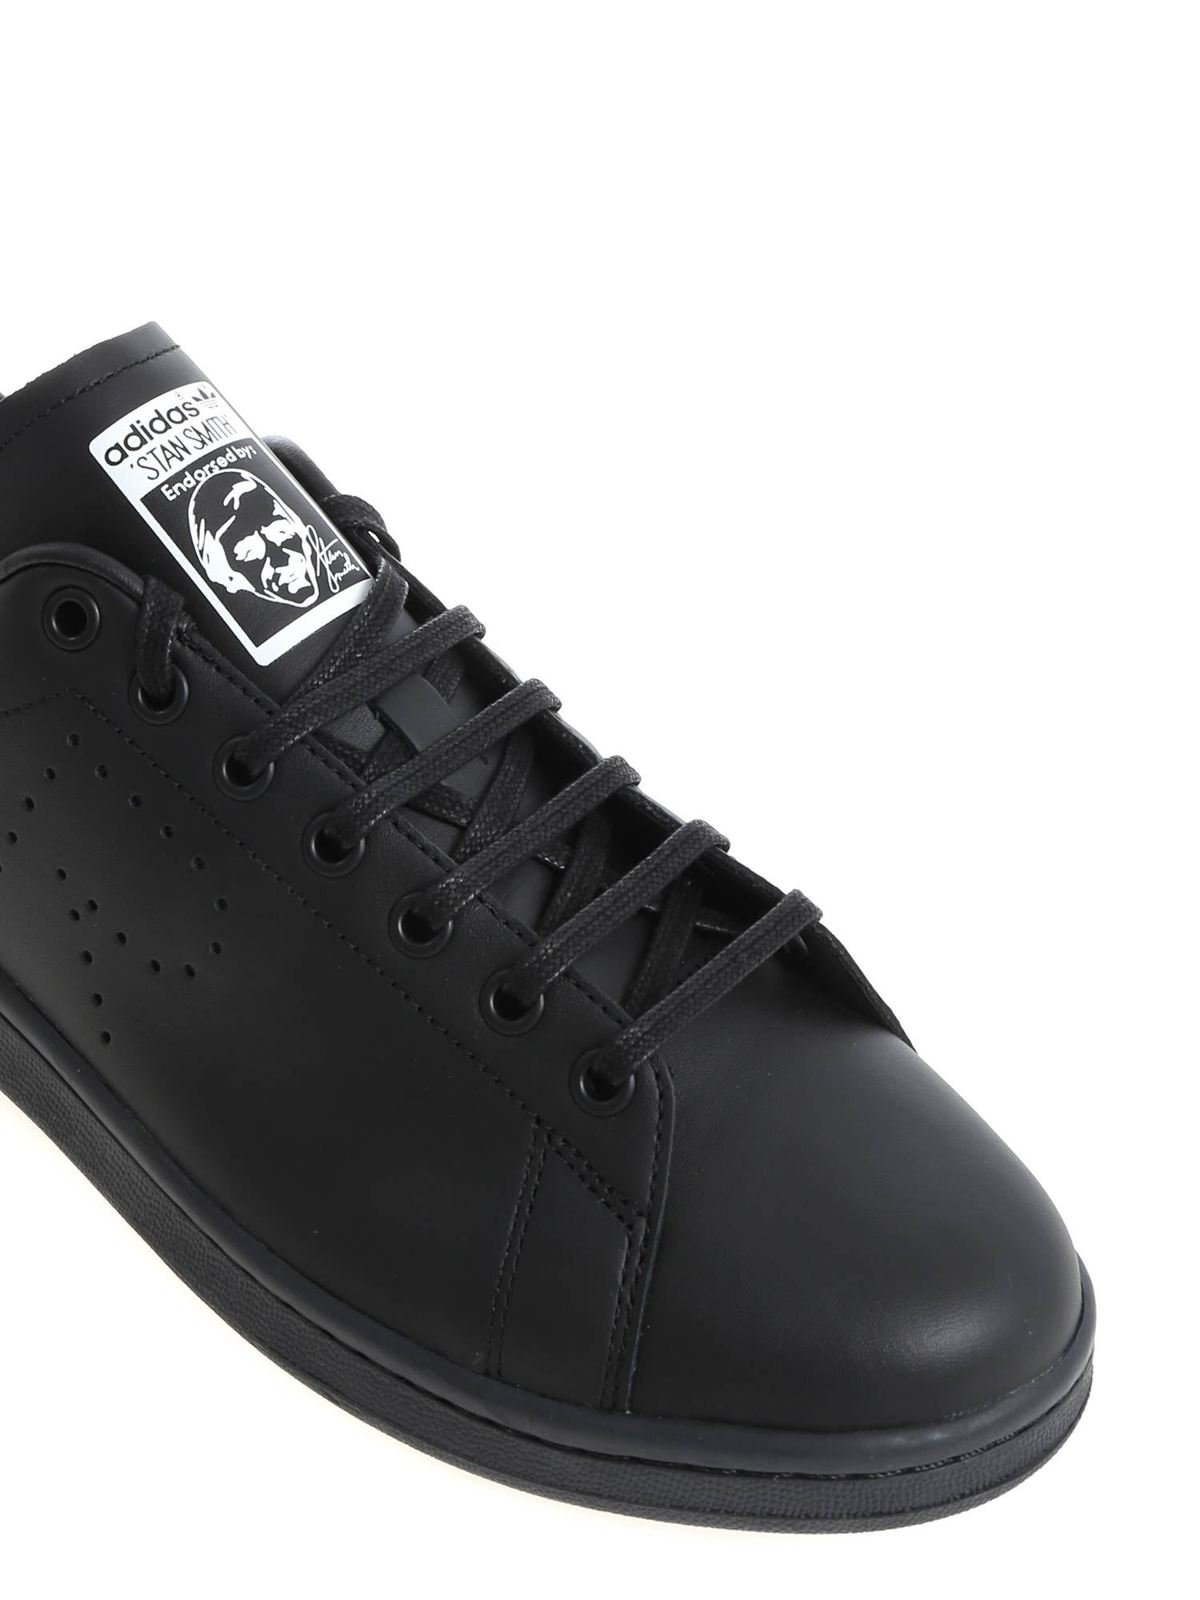 rs stan smith sneakers